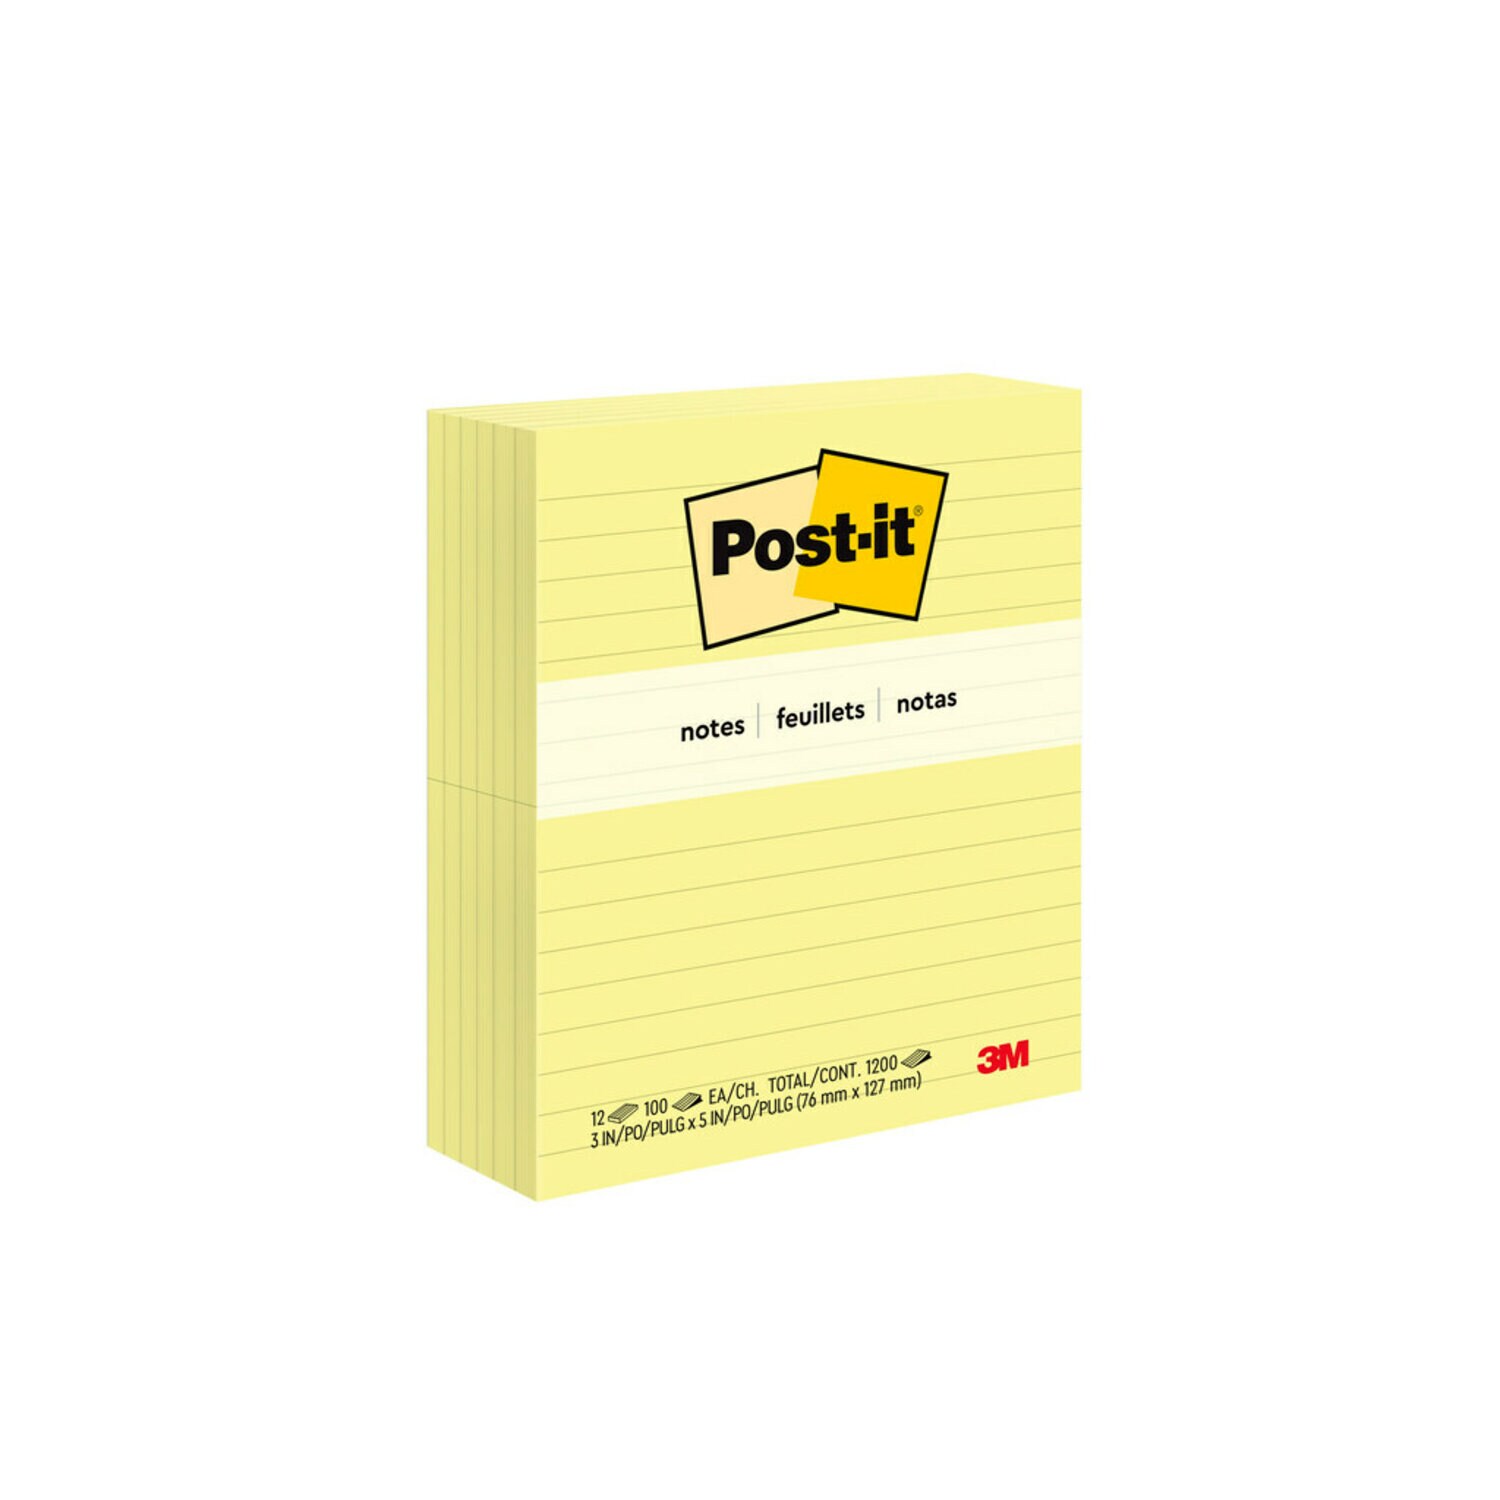 7000047941 - Post-it Notes 635, 3 in x 5 in (76 mm x 127 mm) Canary Yellow, Lined,
12 Pads/Pack